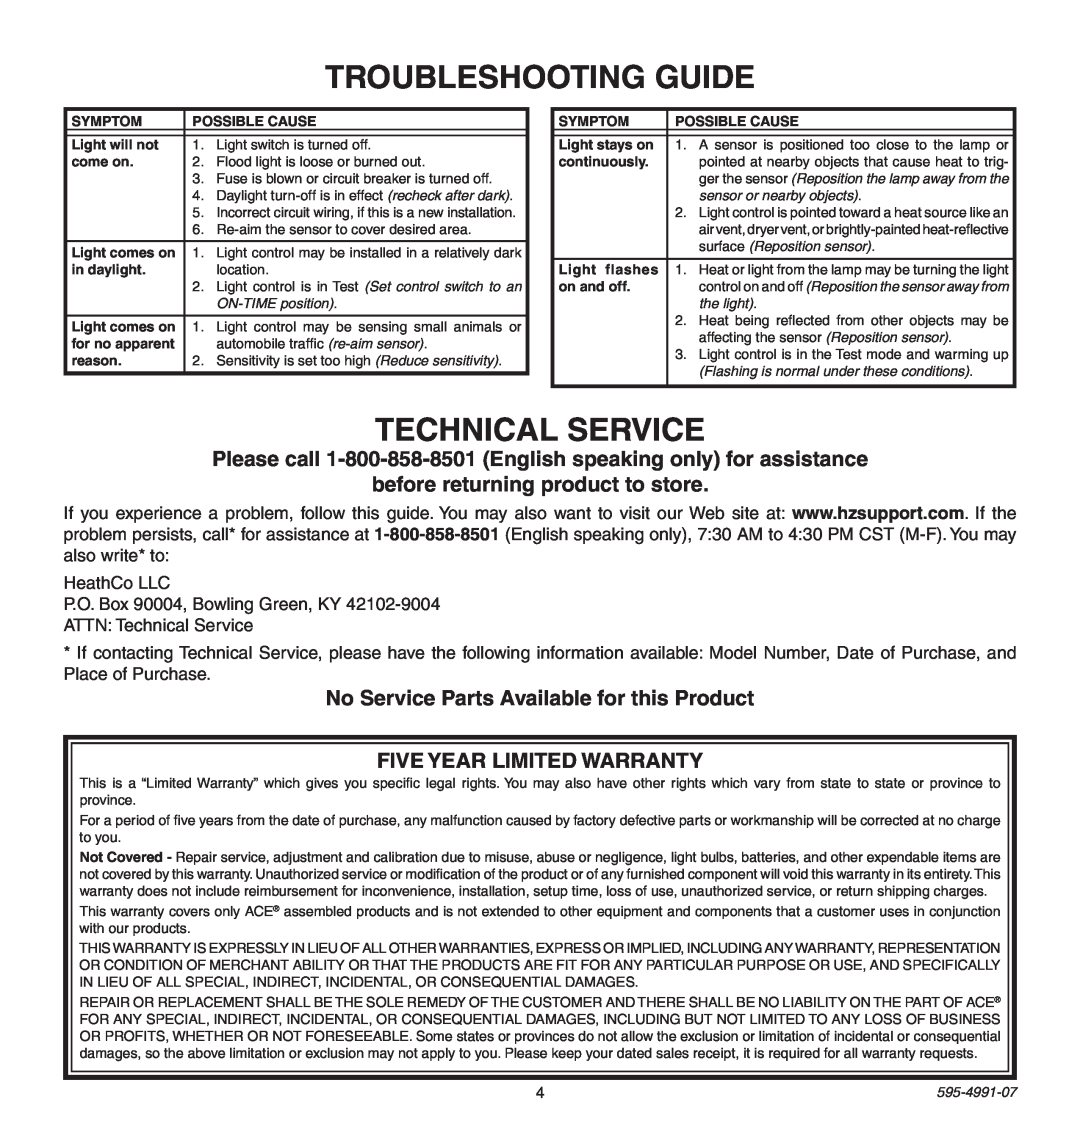 Heath Zenith SL-5210 manual Troubleshooting Guide, Technical Service, before returning product to store 